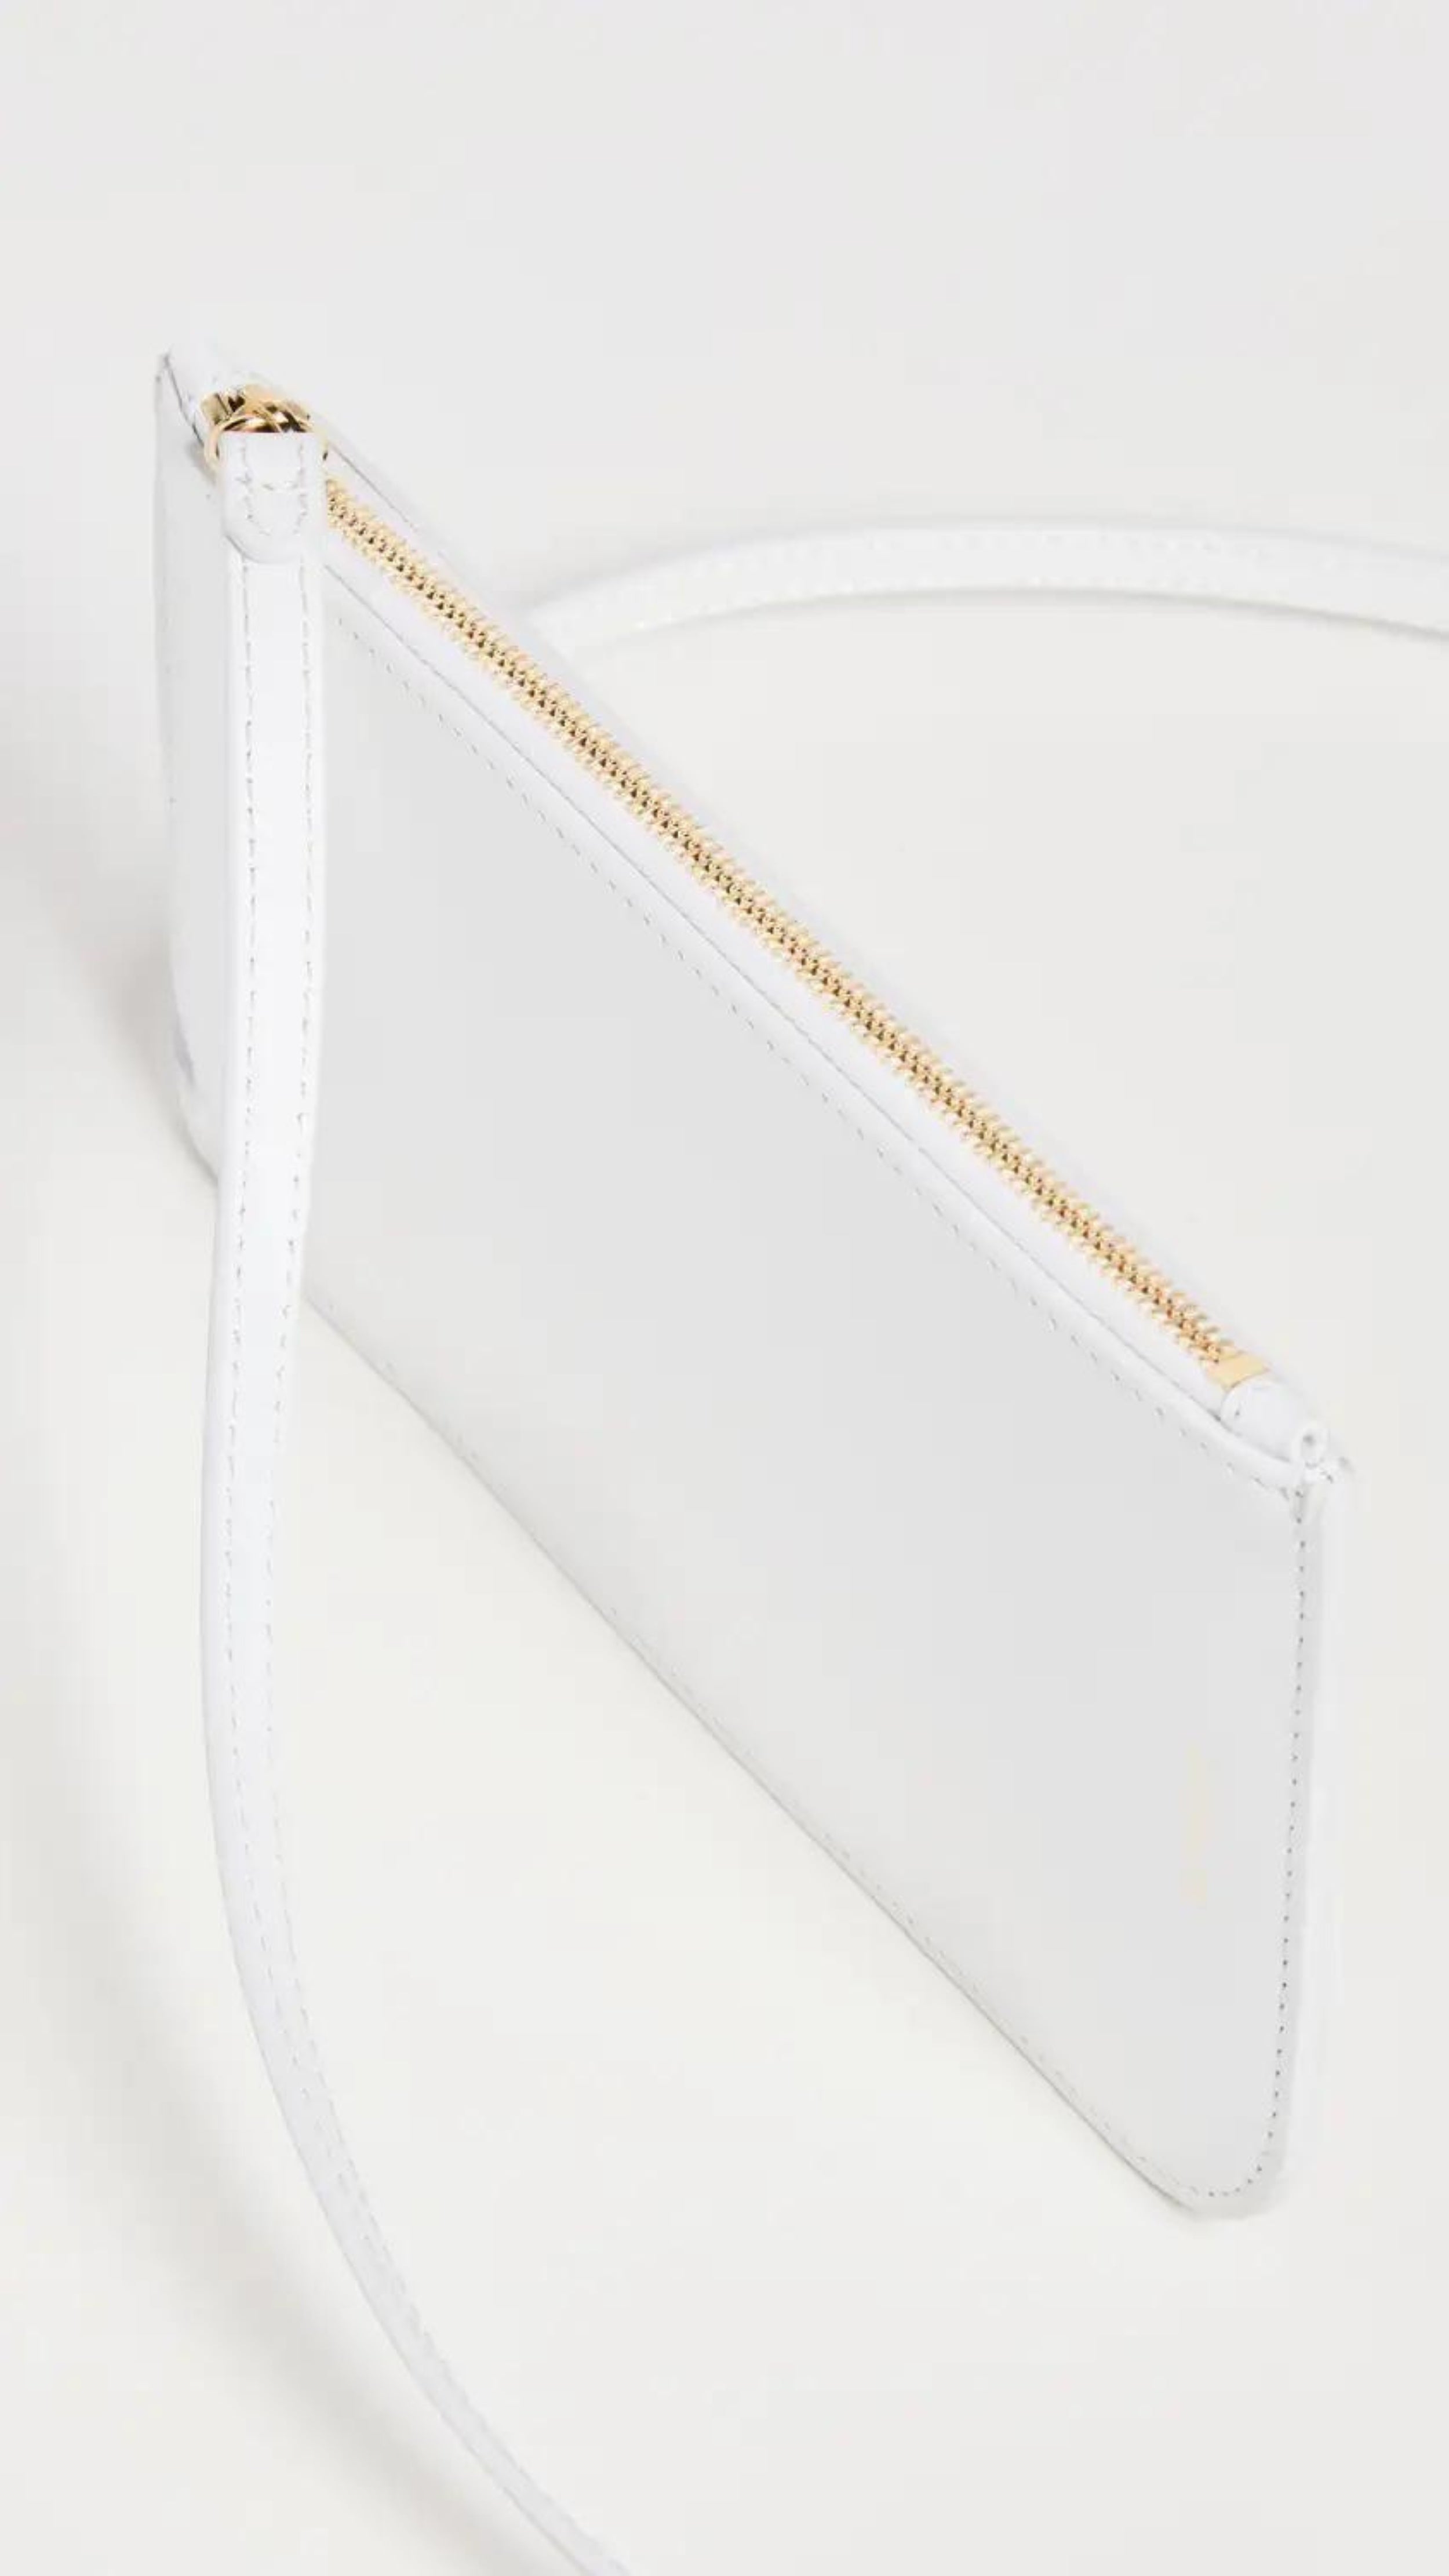 Ree Projects, Do Neck Pouch in White.  A small crossbody of necklace pouch purse to store your phone and other small items. It features adjustable straps to make it easy to wear across the body as a neck pouch or over the shoulder bag. The exterior pocket features a card holder and a side zip closure for added security. Its has light gold tone hardware and single interior compartment. Shown from the side with zipper detail.